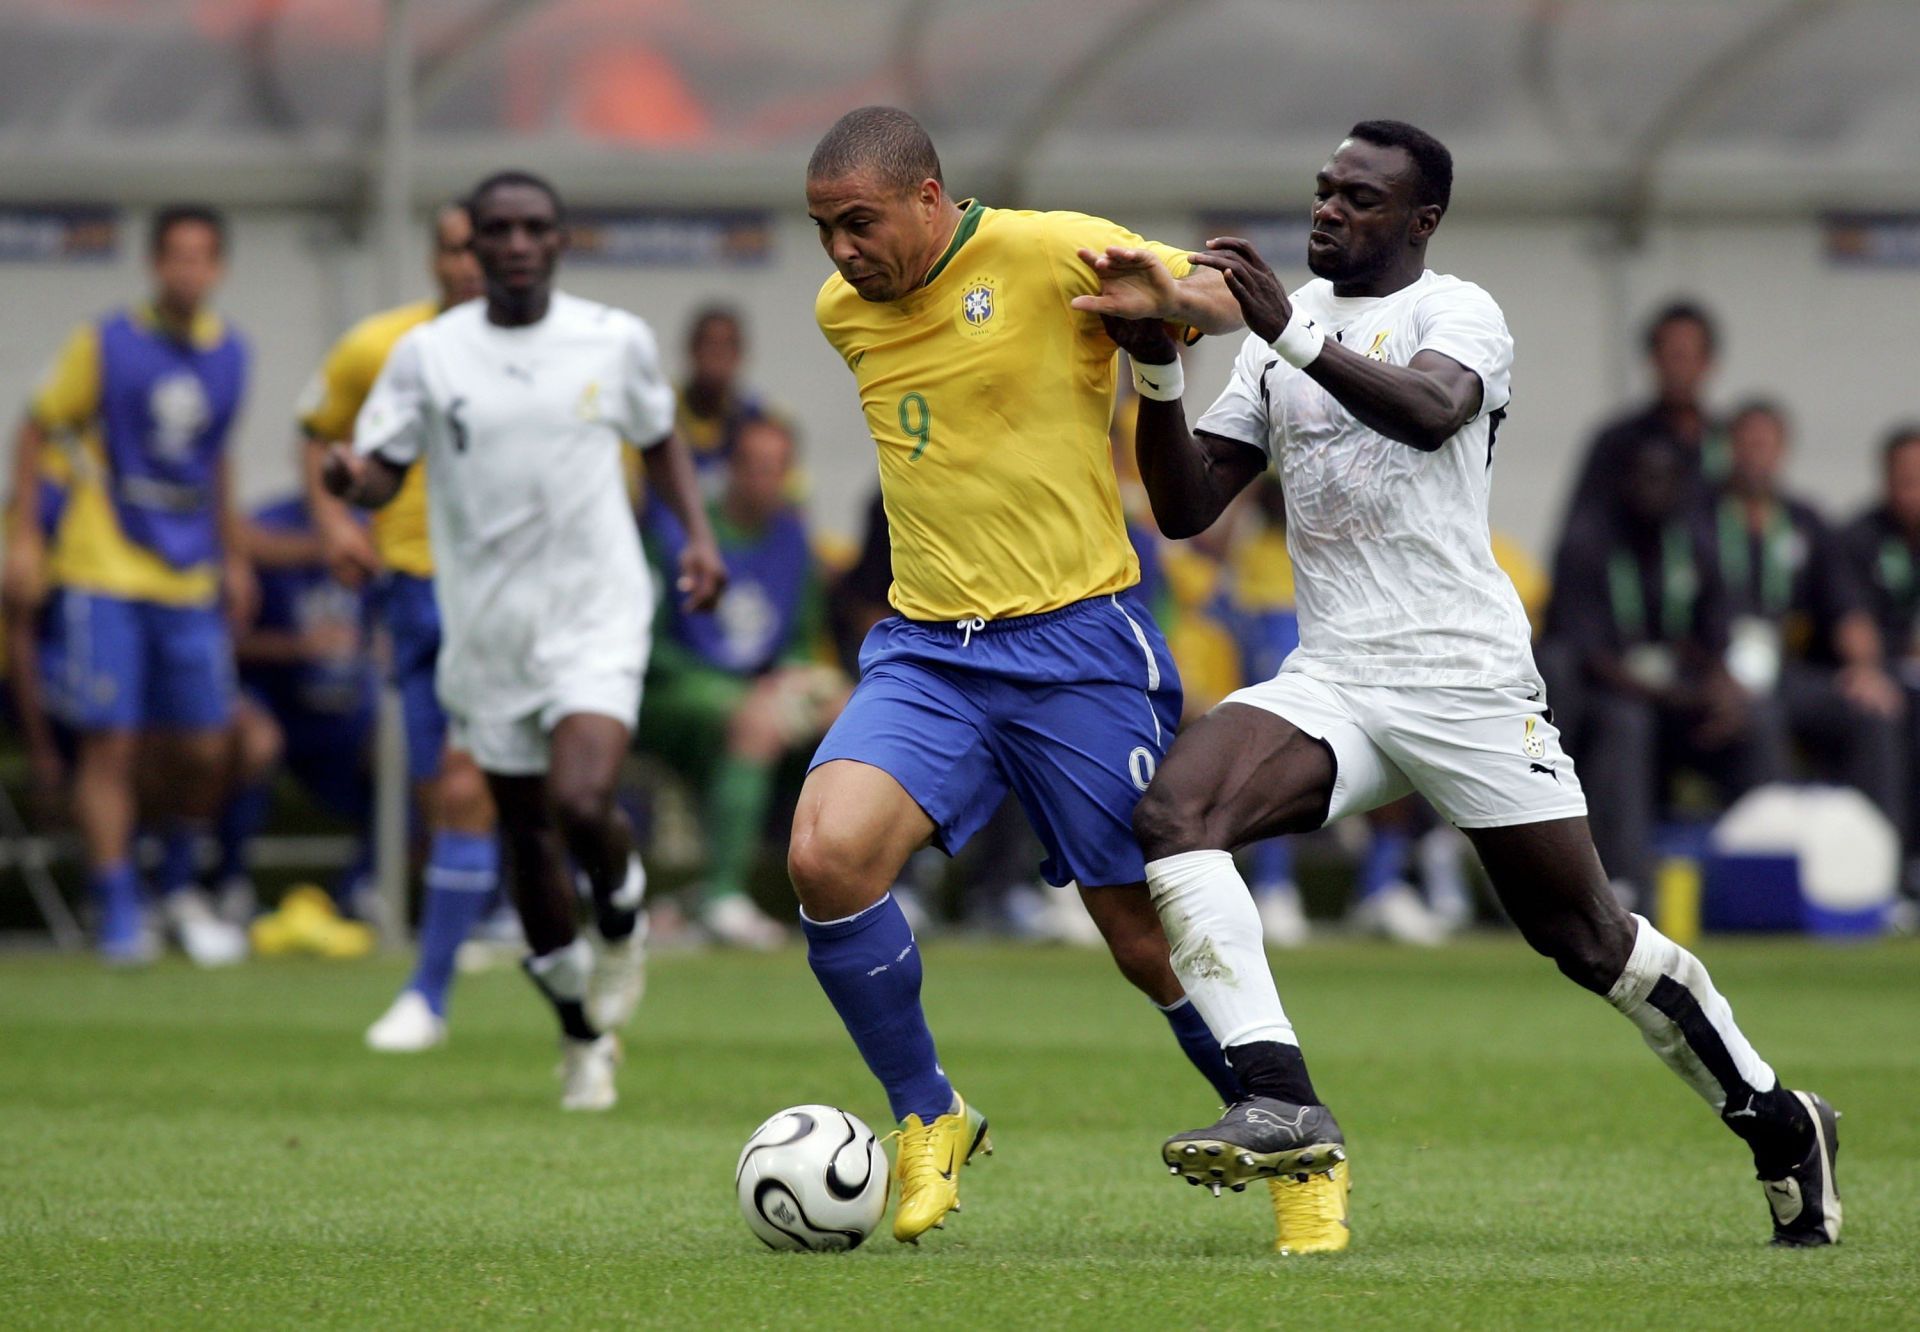 Ronaldo was the greatest player from South America, arguably, during his time